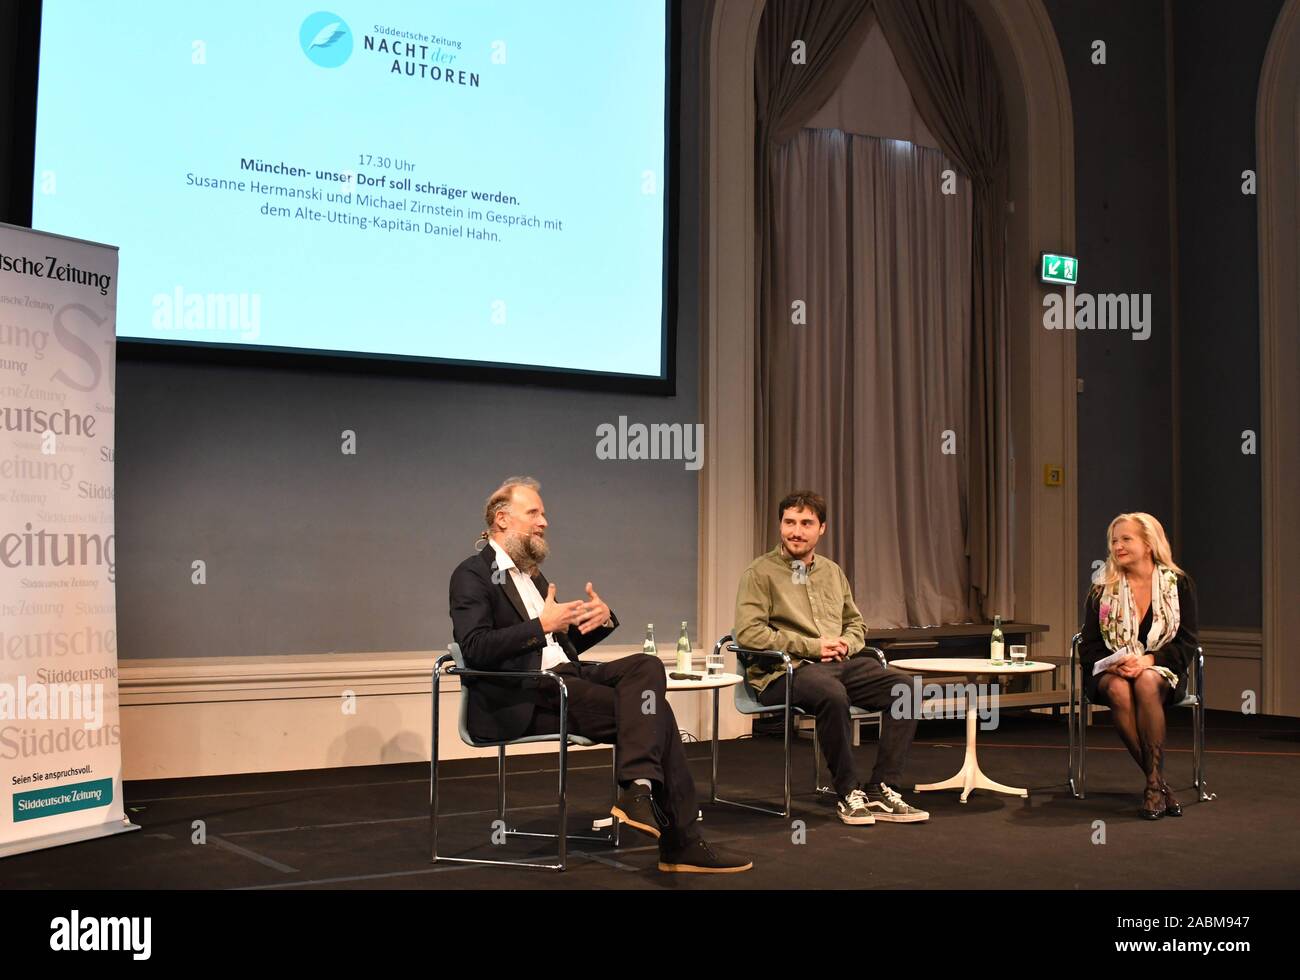 Michael Zirnstein (left) and Susanne Hermanski at the Night of the SZ Authors at the Bavarian Academy of Fine Arts in conversation with Old Utting Captain Daniel Hahn on the topic: "Munich - our village should become more weird". [automated translation] Stock Photo